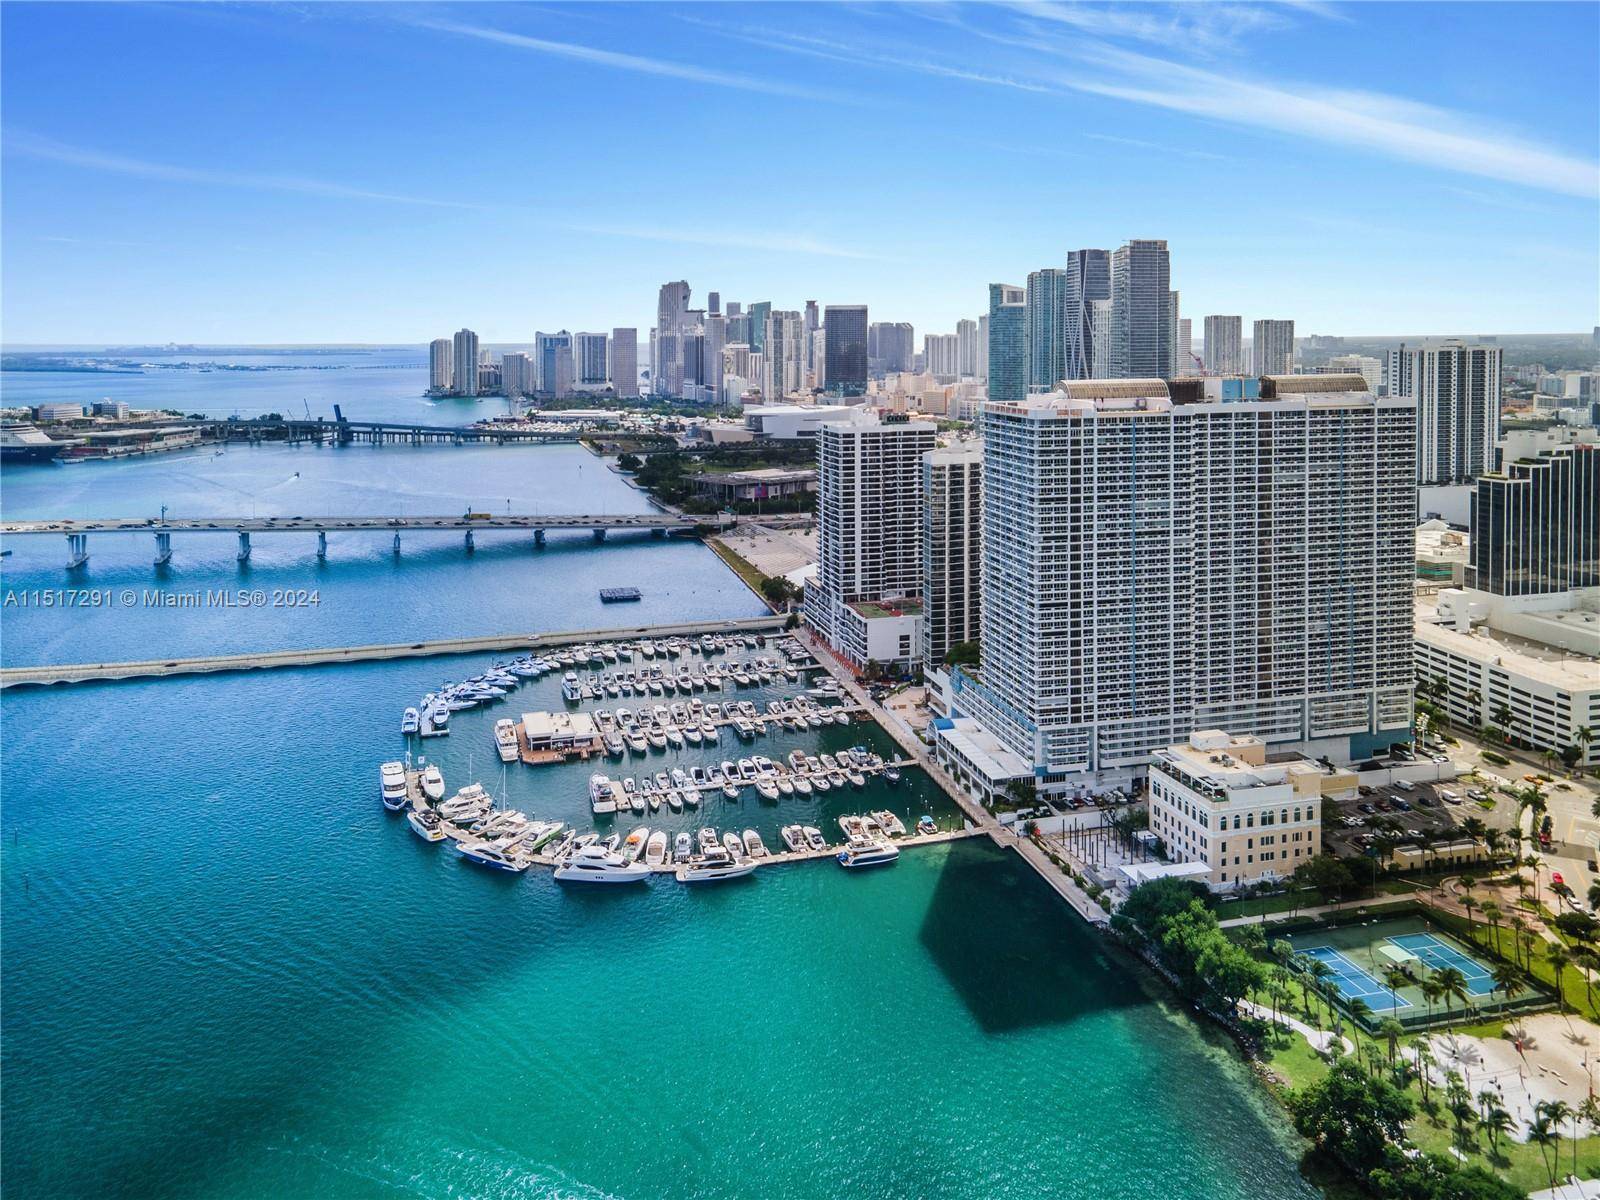 This luxury three bedroom, three bath condo features stunning views of Biscayne Bay and Downtown Miami.